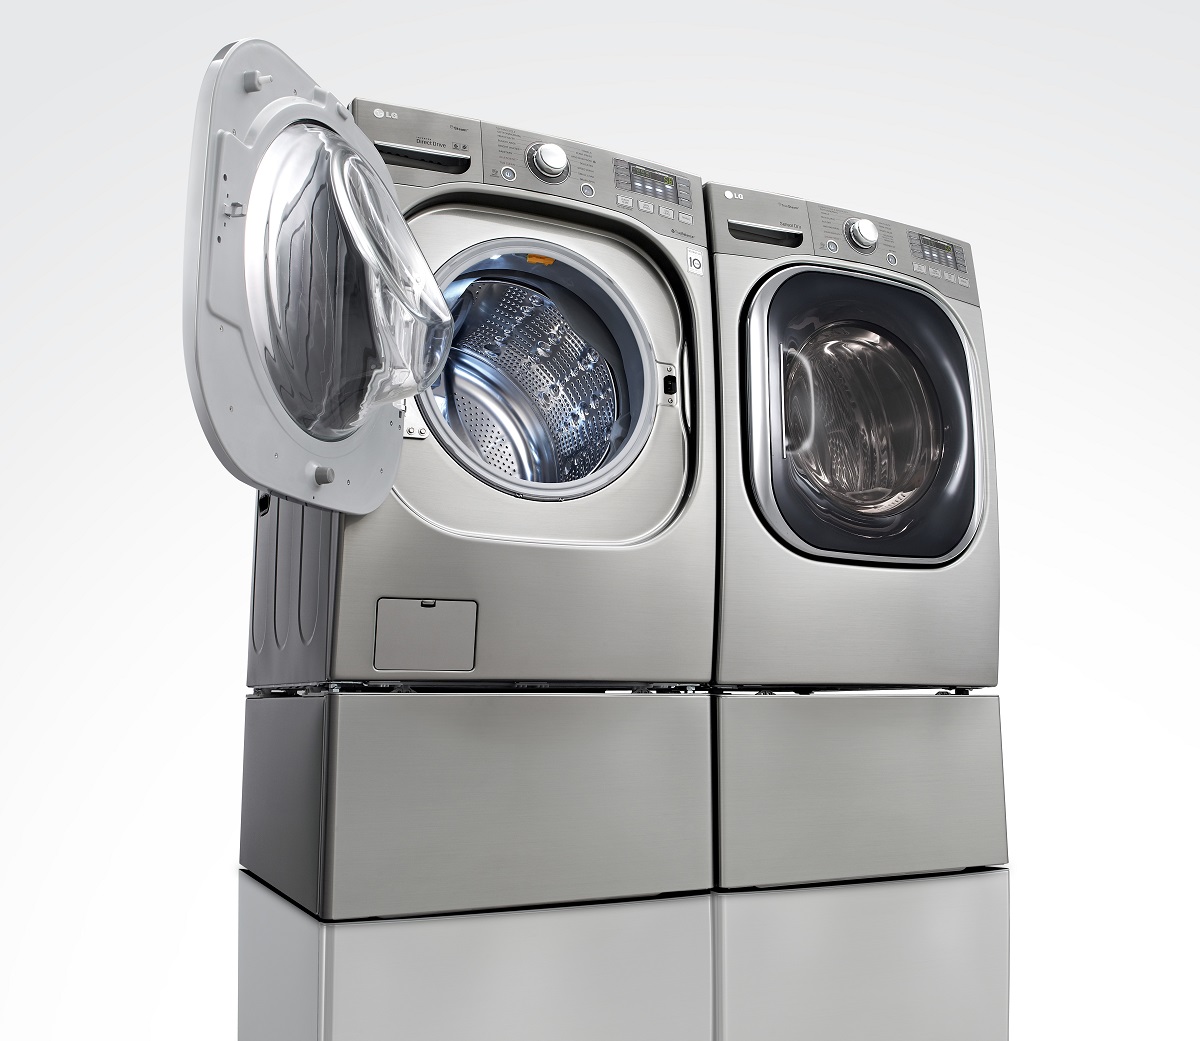 Who Makes LG Washer and Dryers